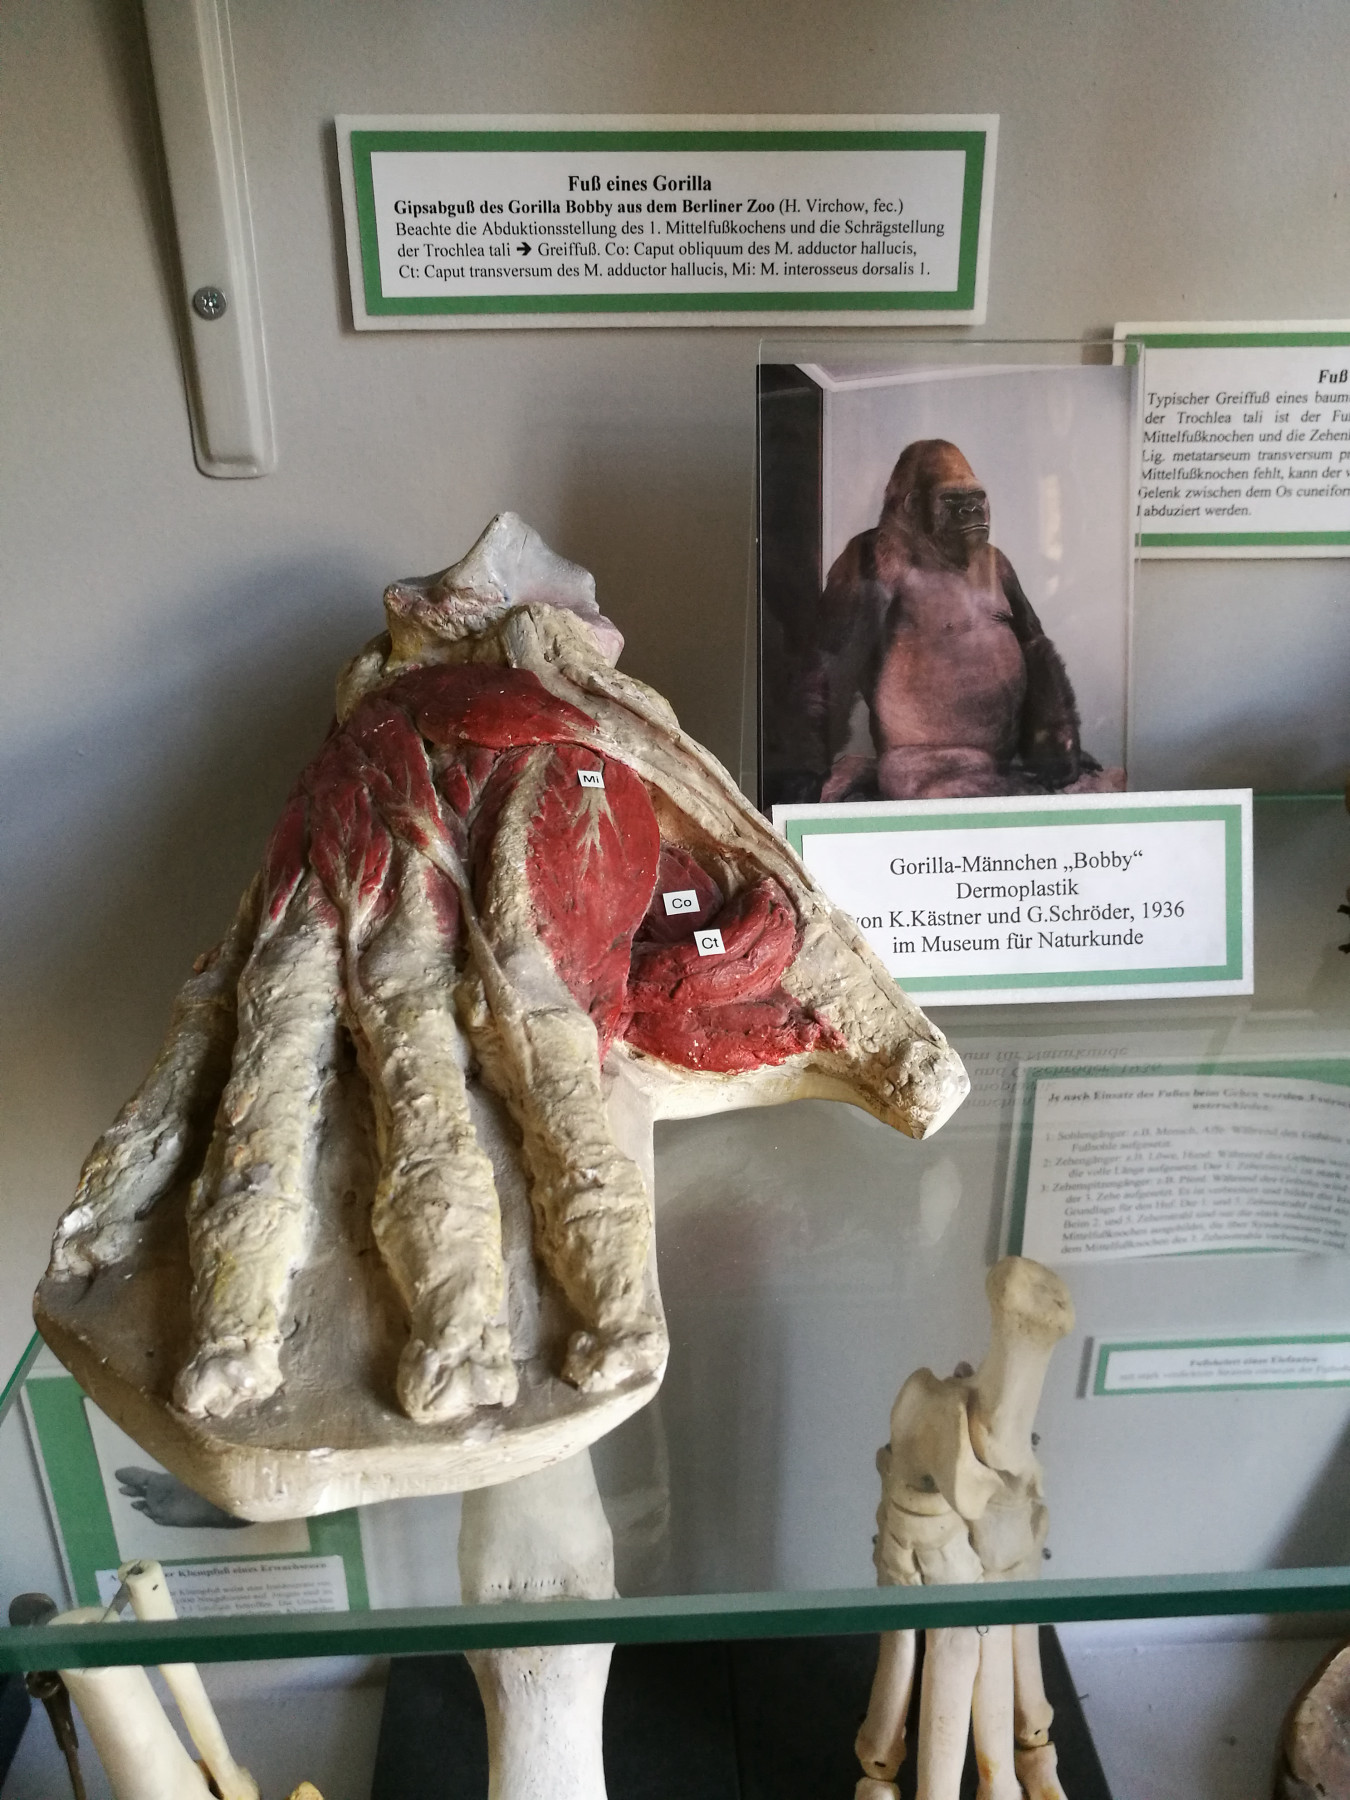 This photo shows a cast of a gorilla foot with the muscles exposed and coloured in a glass display case, beneath it bone sections from other extremities. Behind the plaster foot is a colour photo of "Bobby" the gorilla together with a number of labels with writing on them.